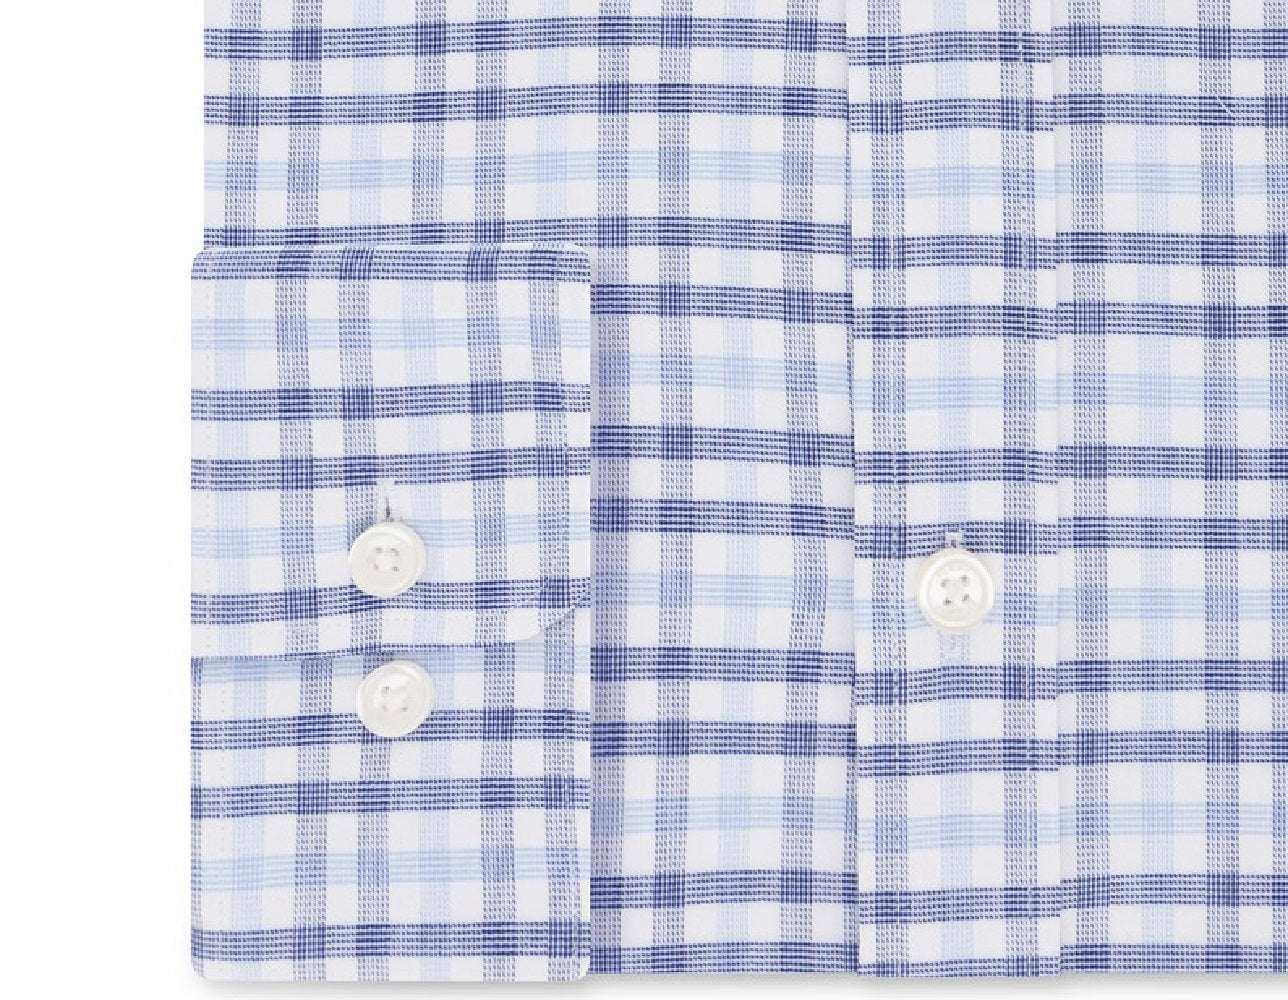 Tommy Hilfiger Men's Fitted Performance Stretch Blue Check Dress Shirt Blue Size 16.5x36-37